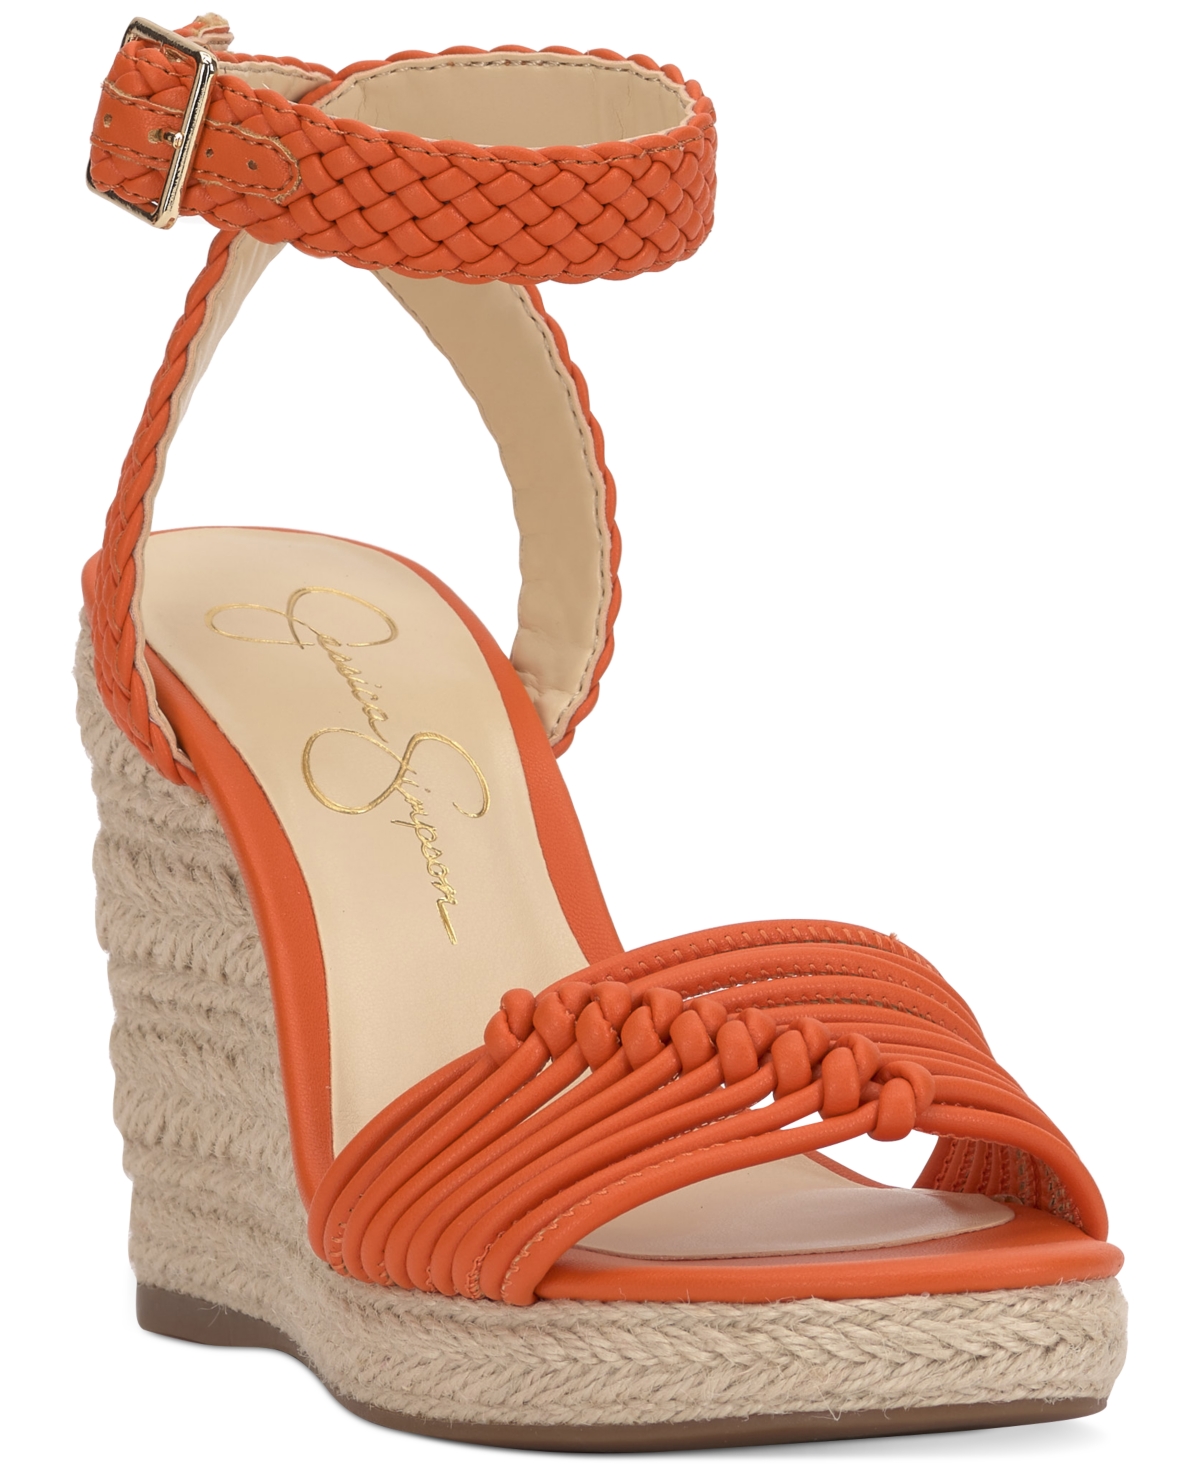 Women's Talise Knotted Strappy Platform Wedge Sandals - Tangerine